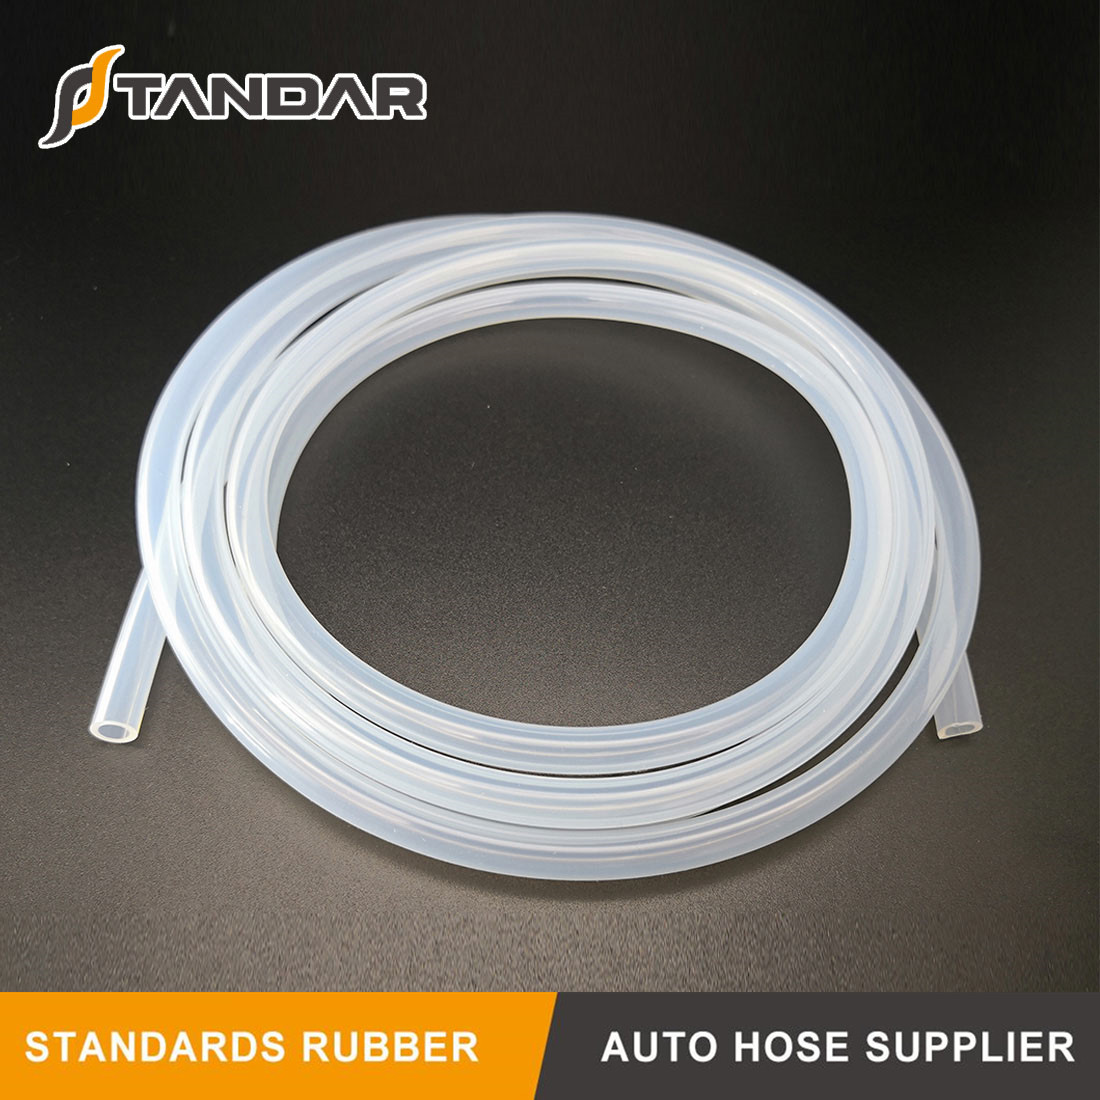 What are the disinfection methods for medical grade silicone hoses?